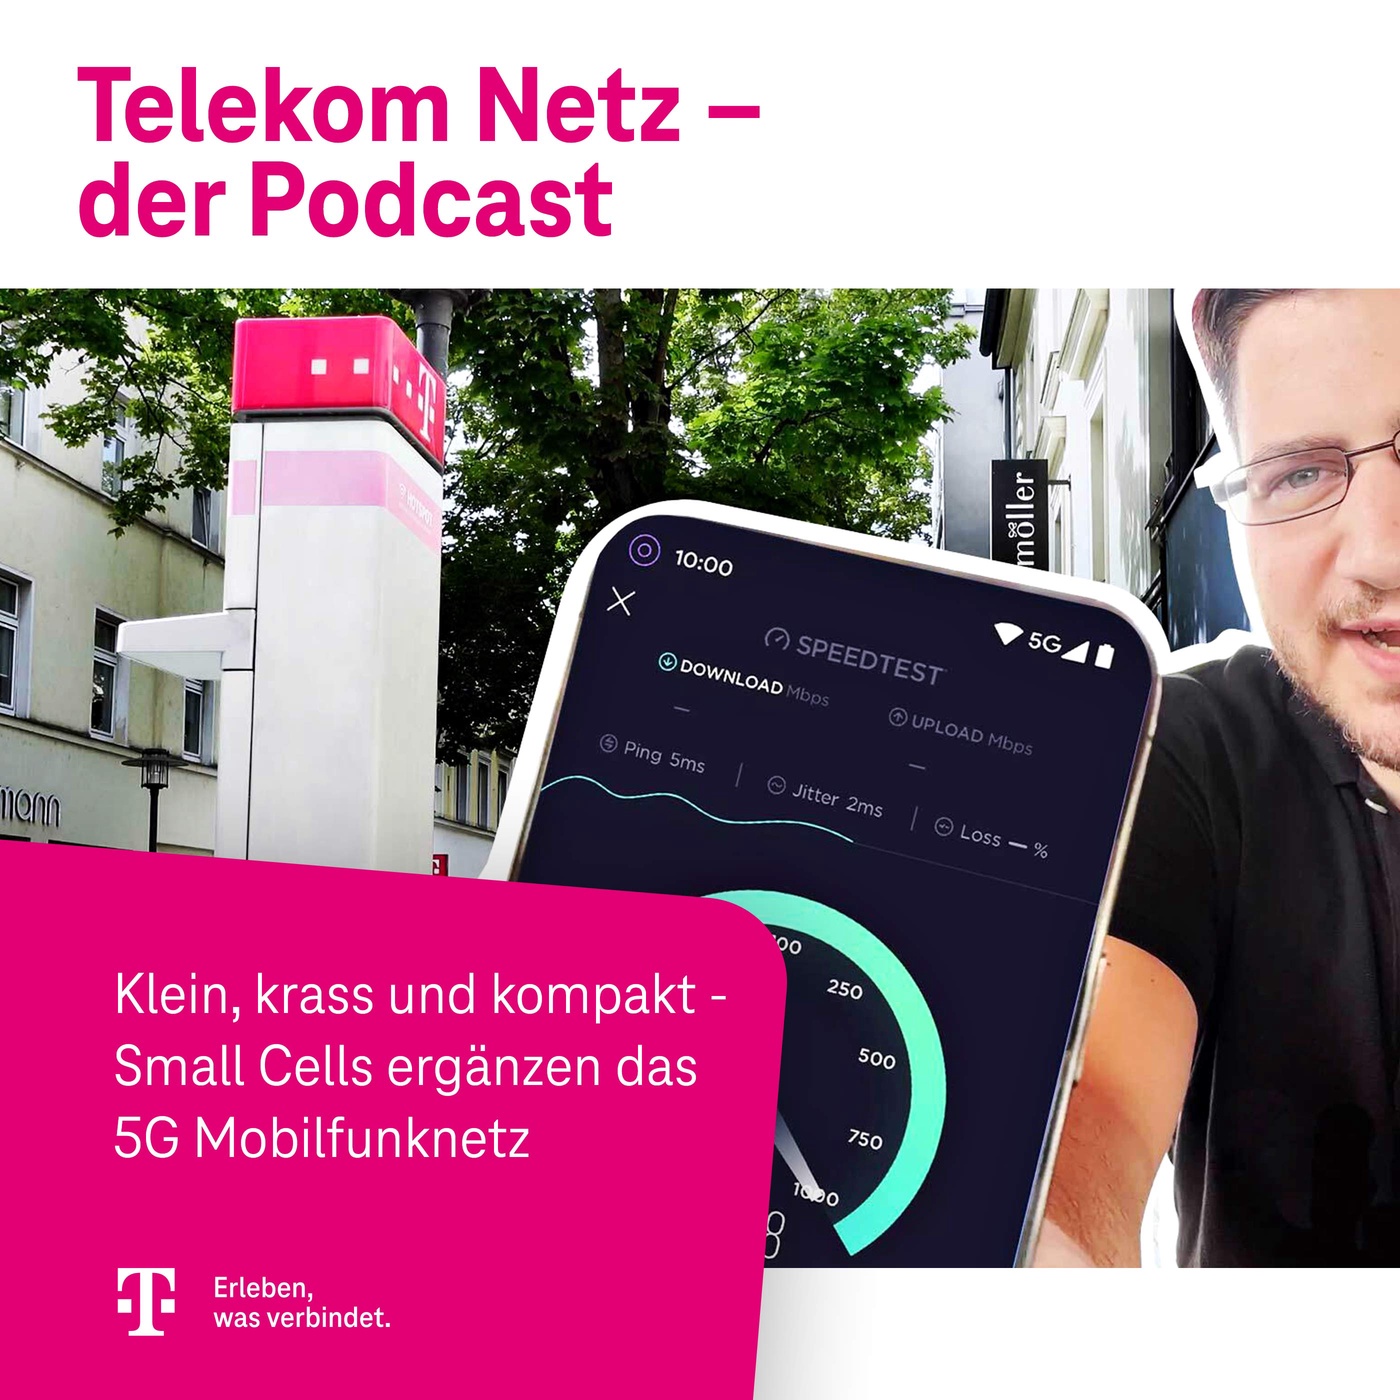 Episode 124 – Small Cells mit 5G